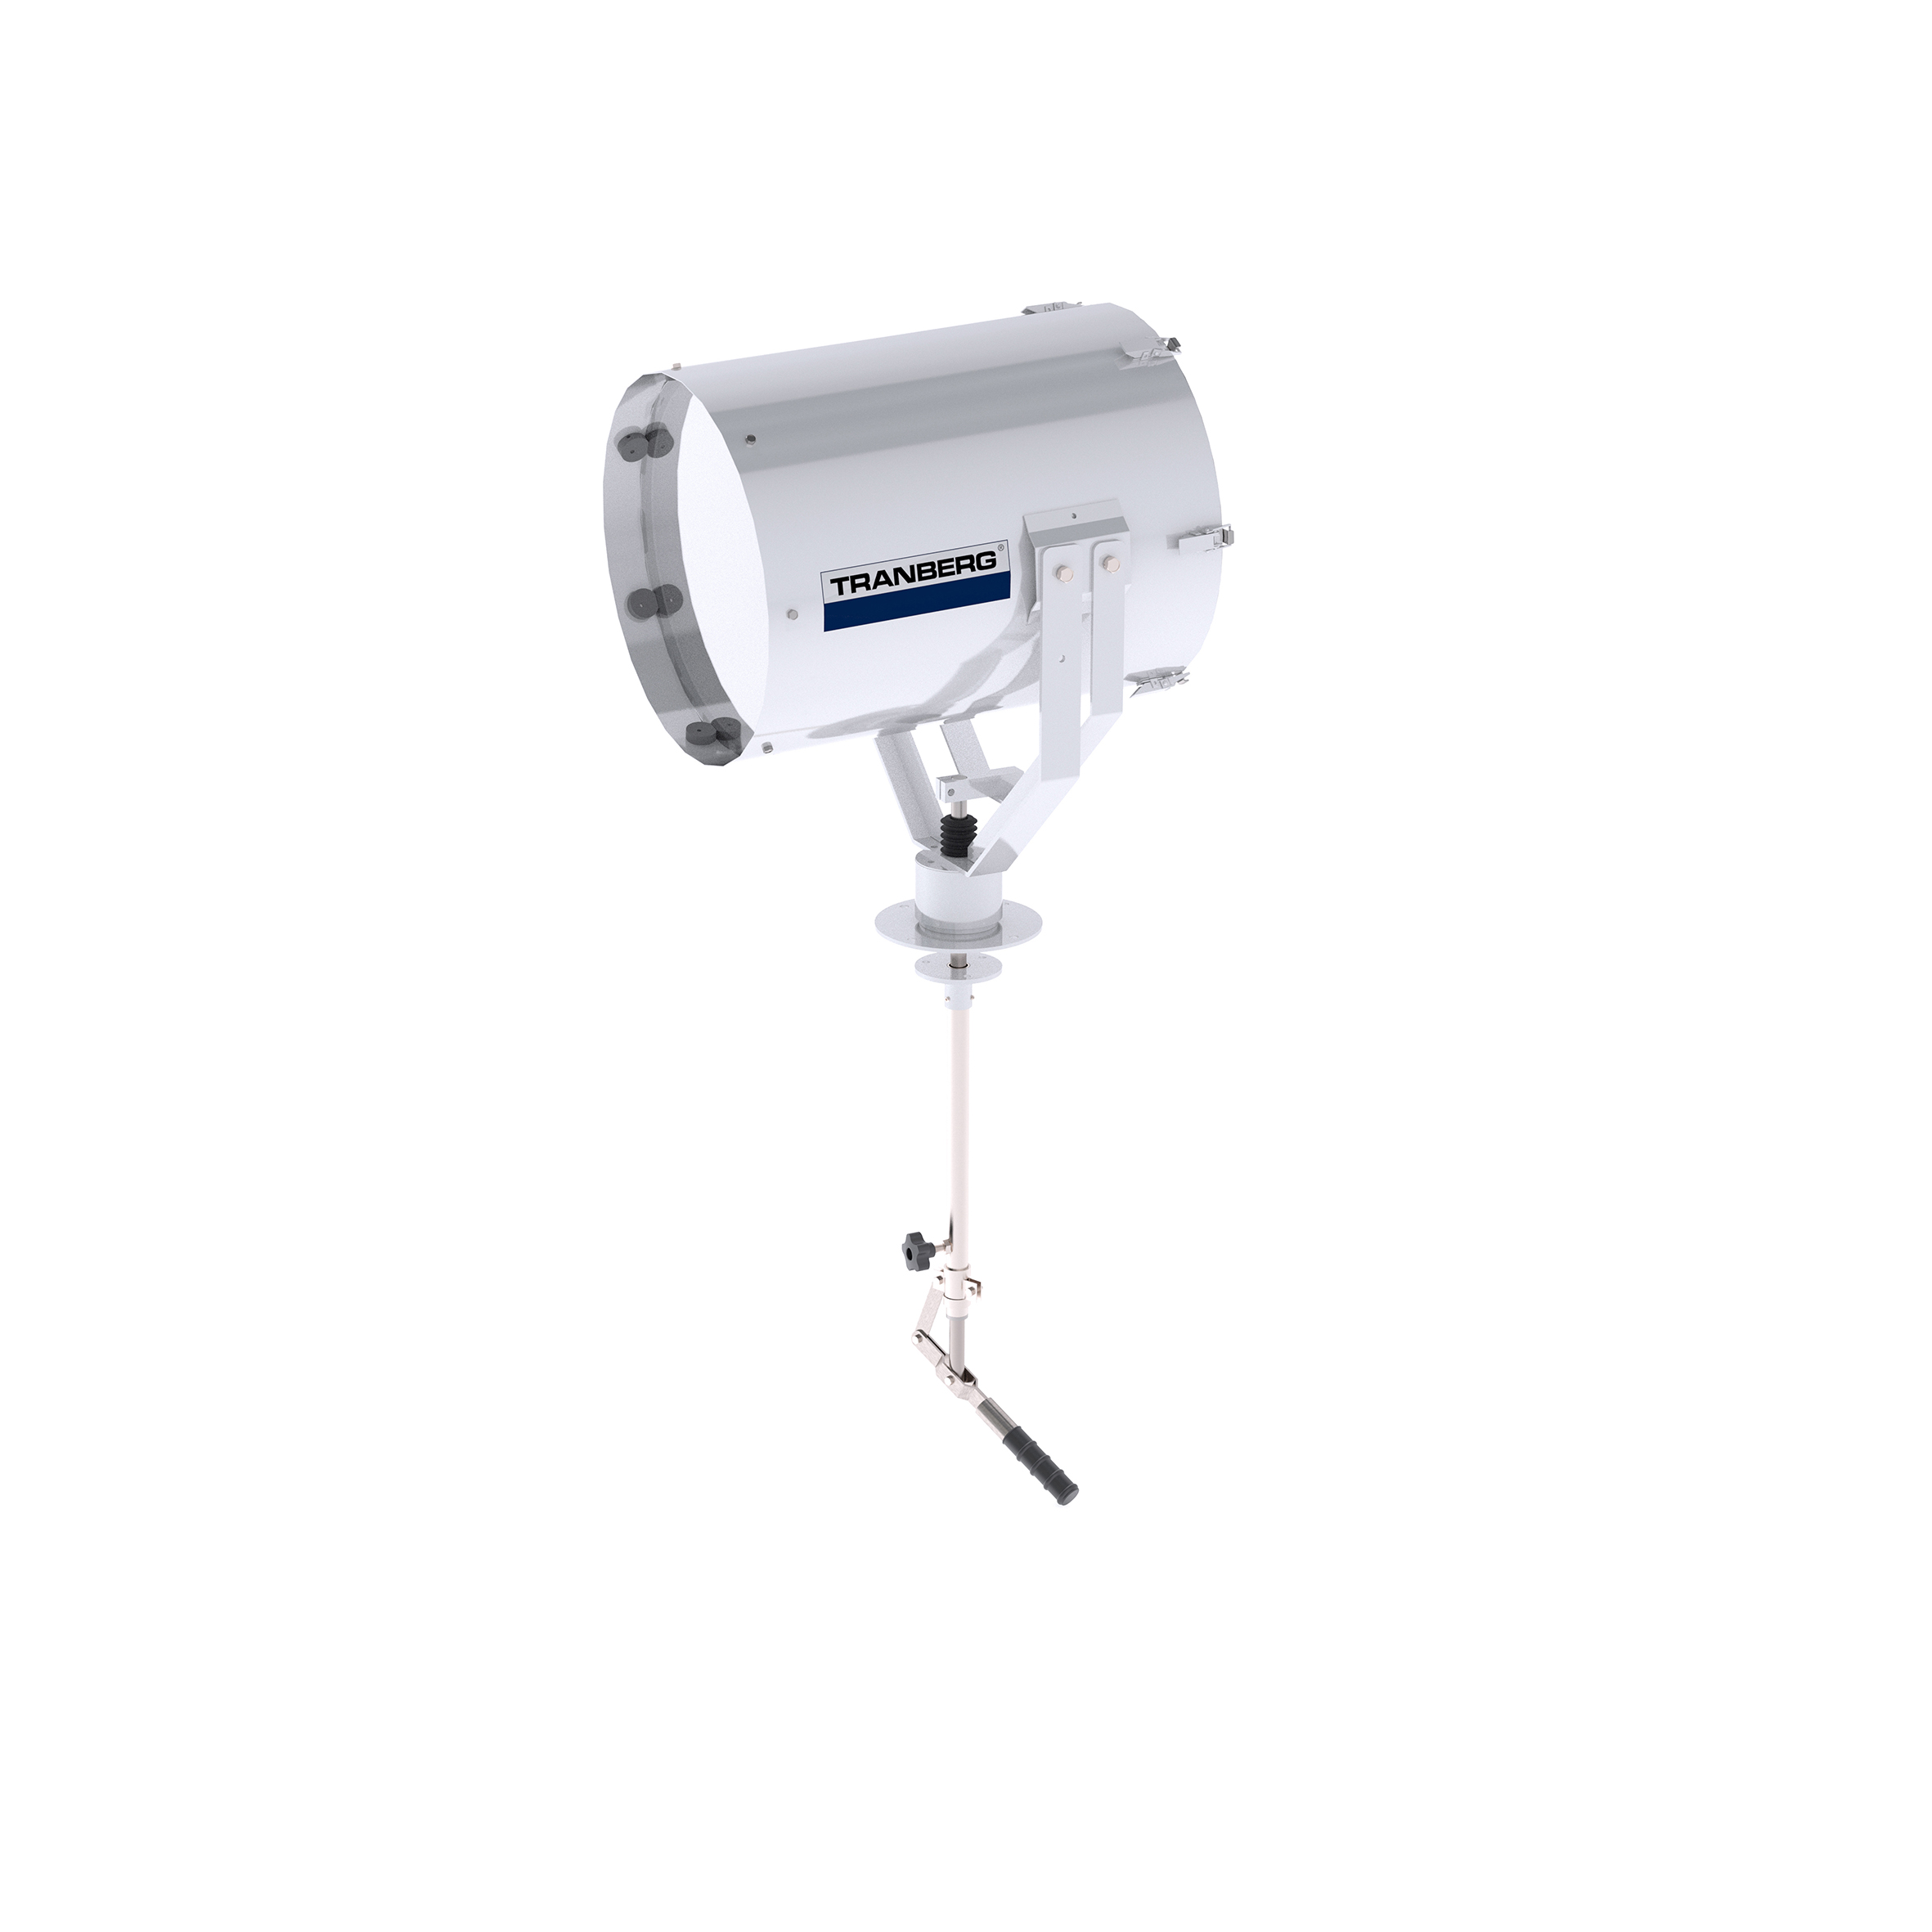 TEF 2630 Searchlight: Halogen 1000W bulb incl, 230V, Bridge Controlled, Stainless Steel photo